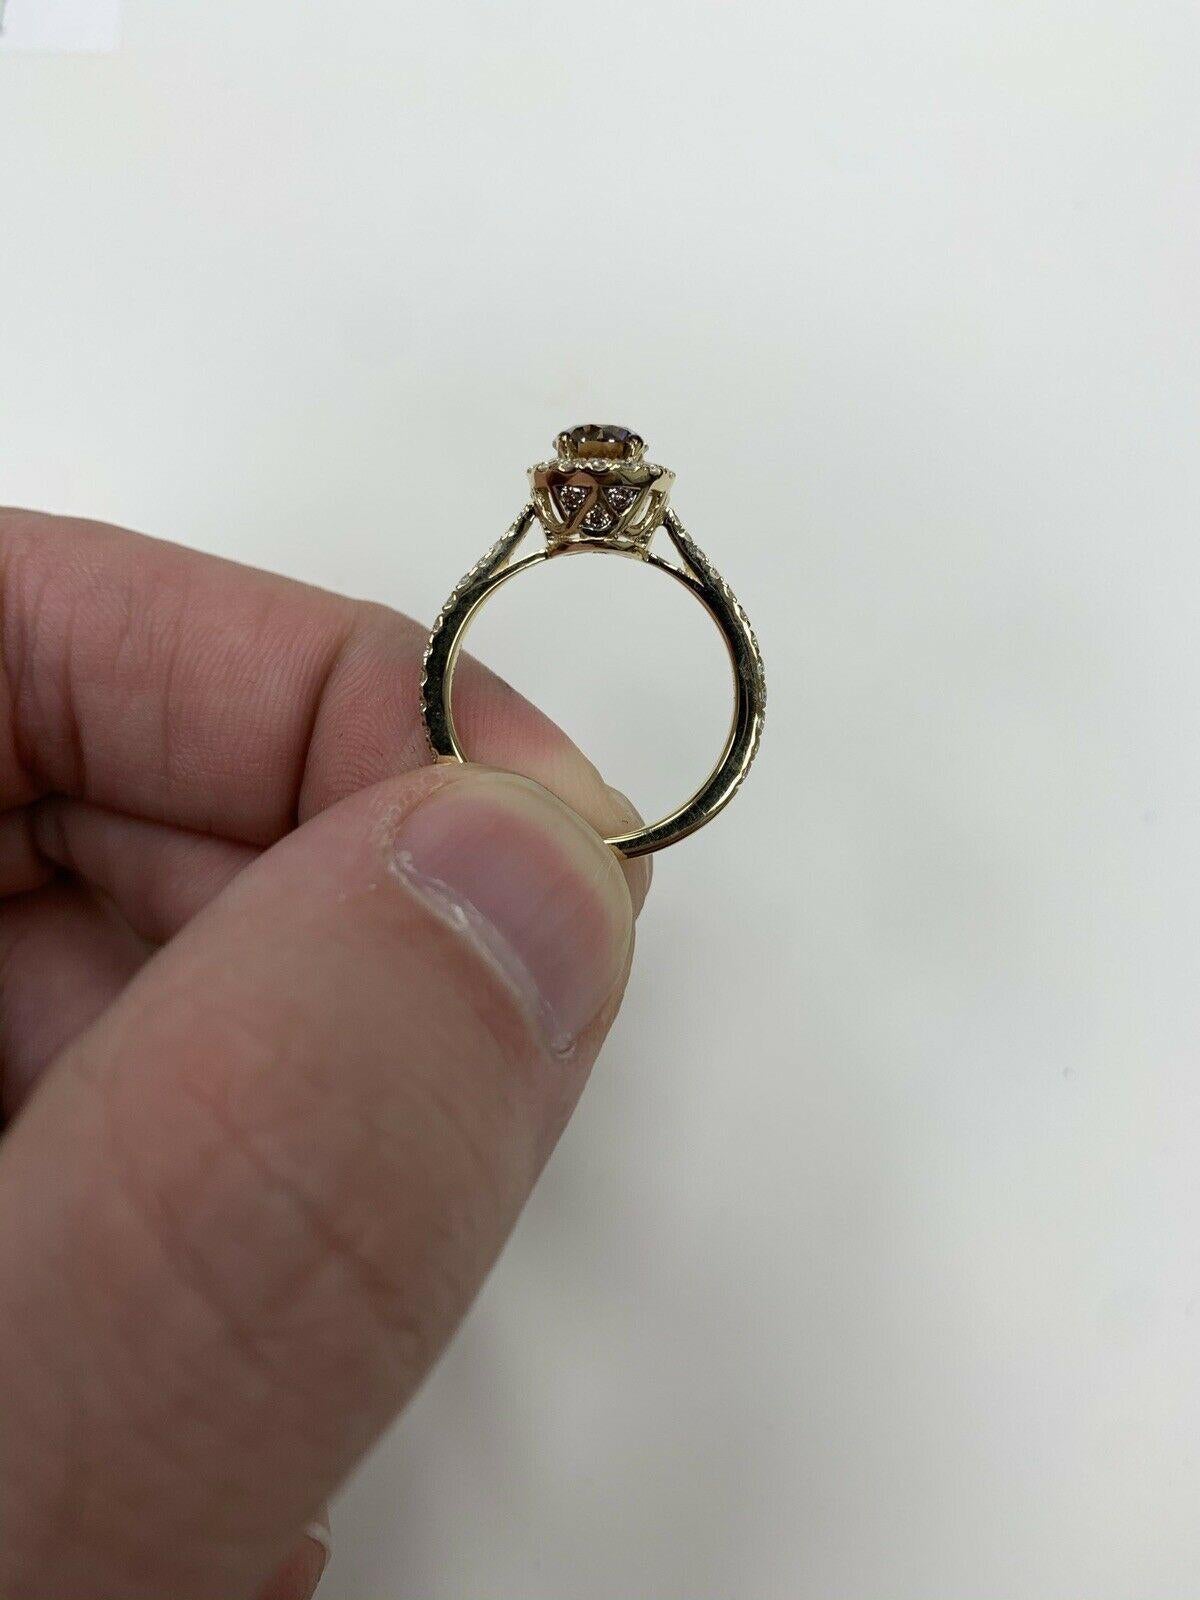 Le Vian Chocolatier Ring Featuring Chocolate Diamonds, Vanilla Diamonds Set in In New Condition For Sale In Great Neck, NY